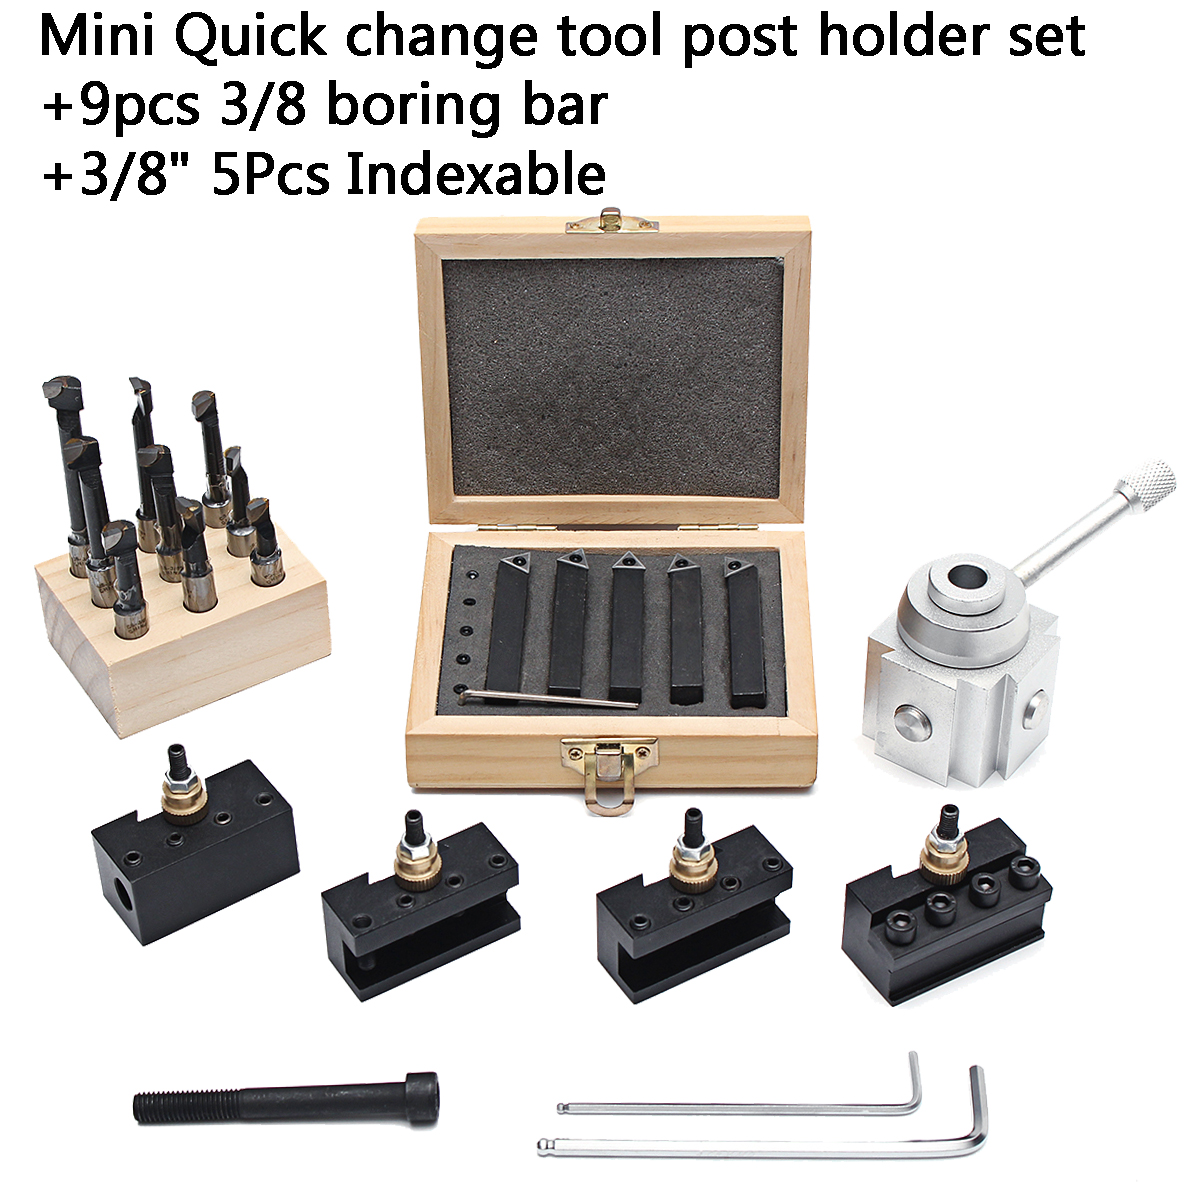 Mini-Quick-Change-Tool-Post-Holder-Set-with-9pcs-38-Inch-Boring-Bar-and-5pcs-Indexable-Blade-1190276-1